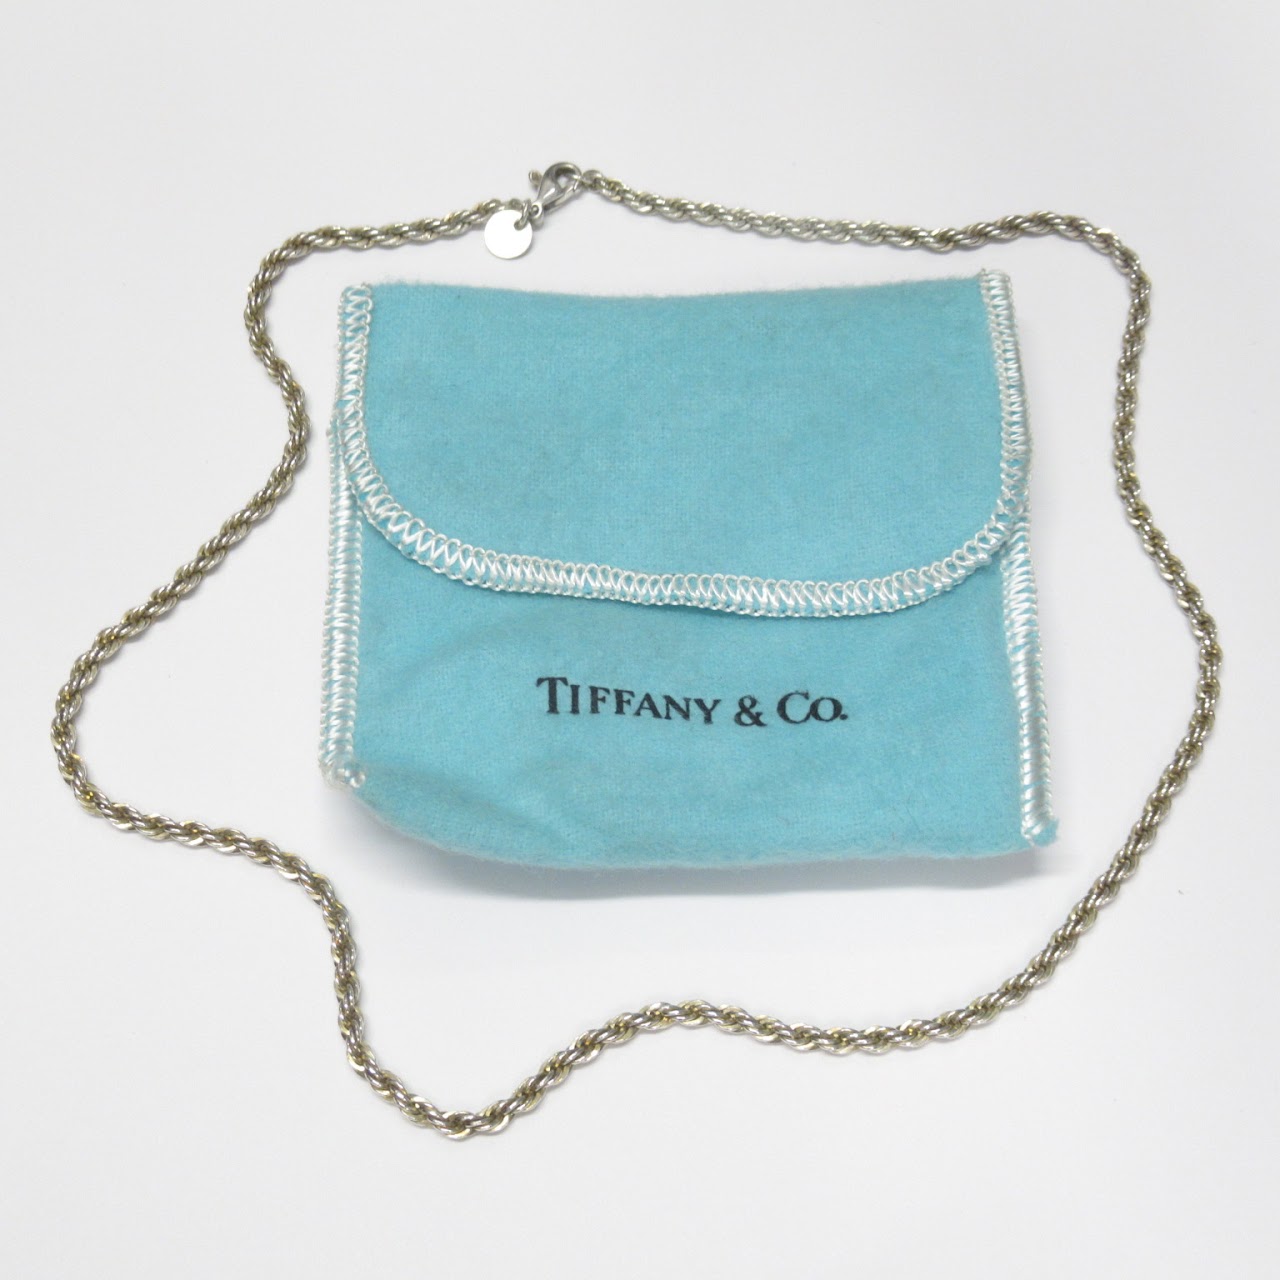 Tiffany & Co. Sterling Silver Twisted Chain Necklace